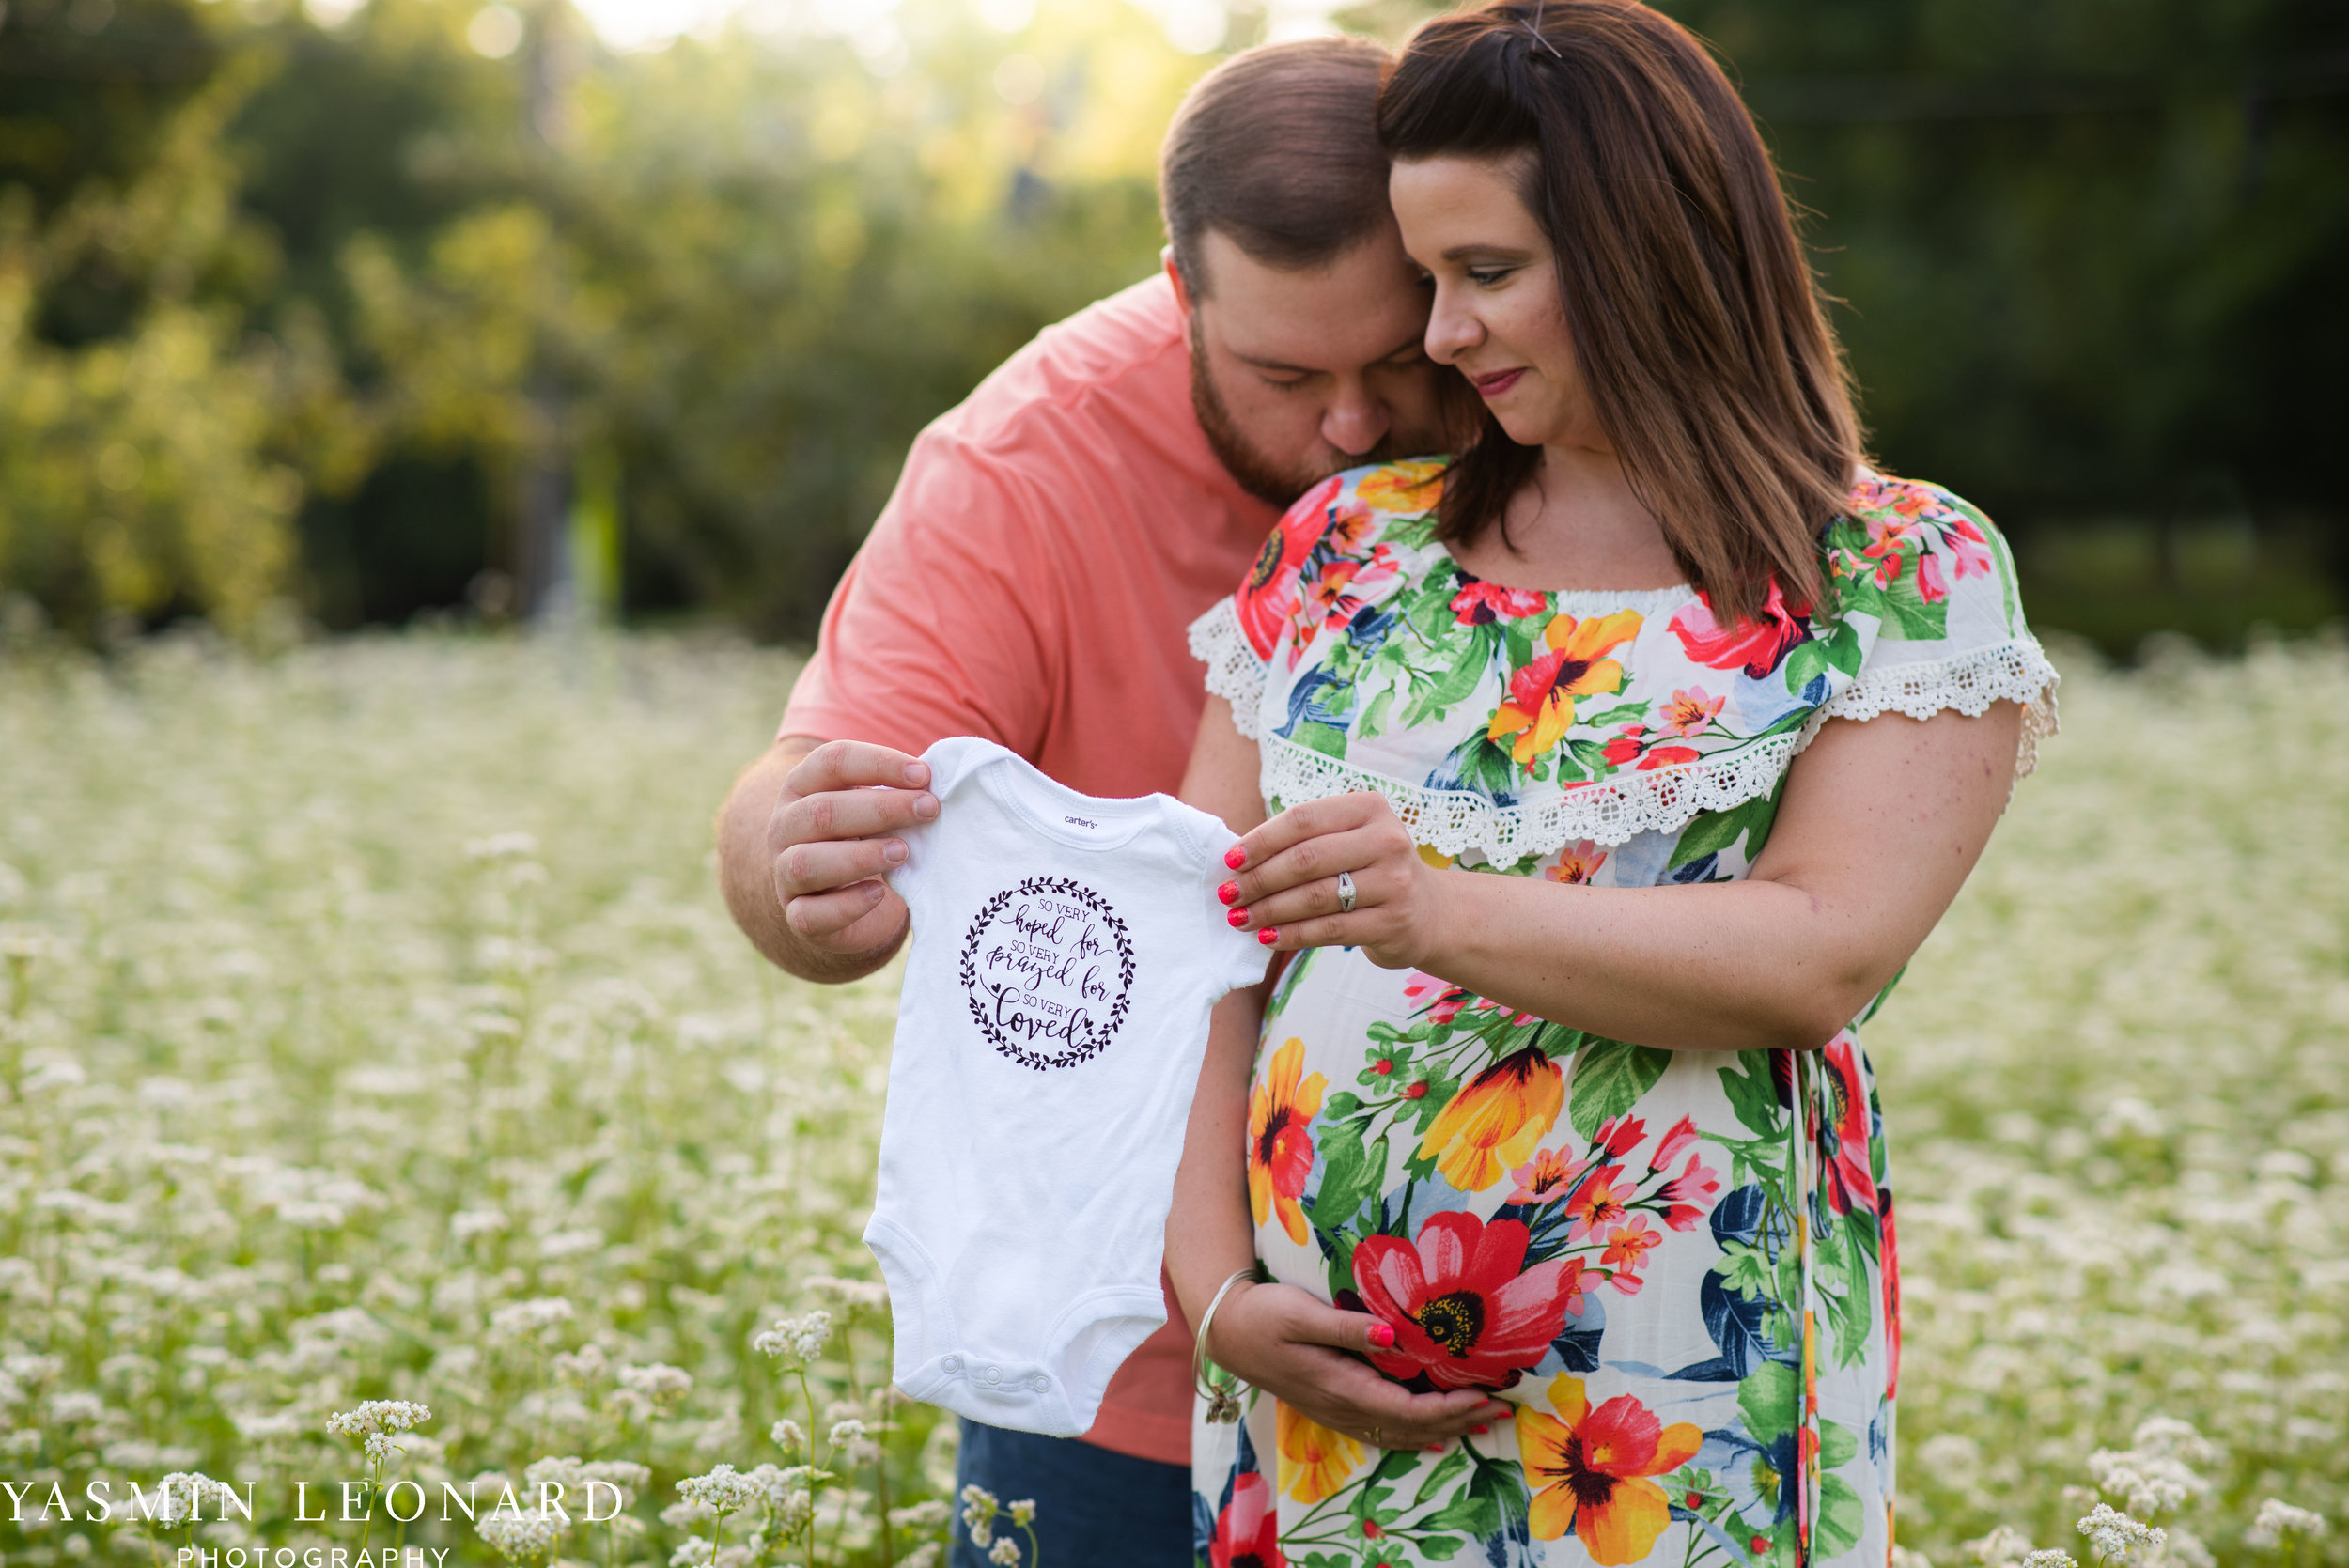 Maternity Session - Summer Maternity Session - Maternity Ideas - High Point Photographer - NC Photographer - What to wear Maternity Session-1.jpg